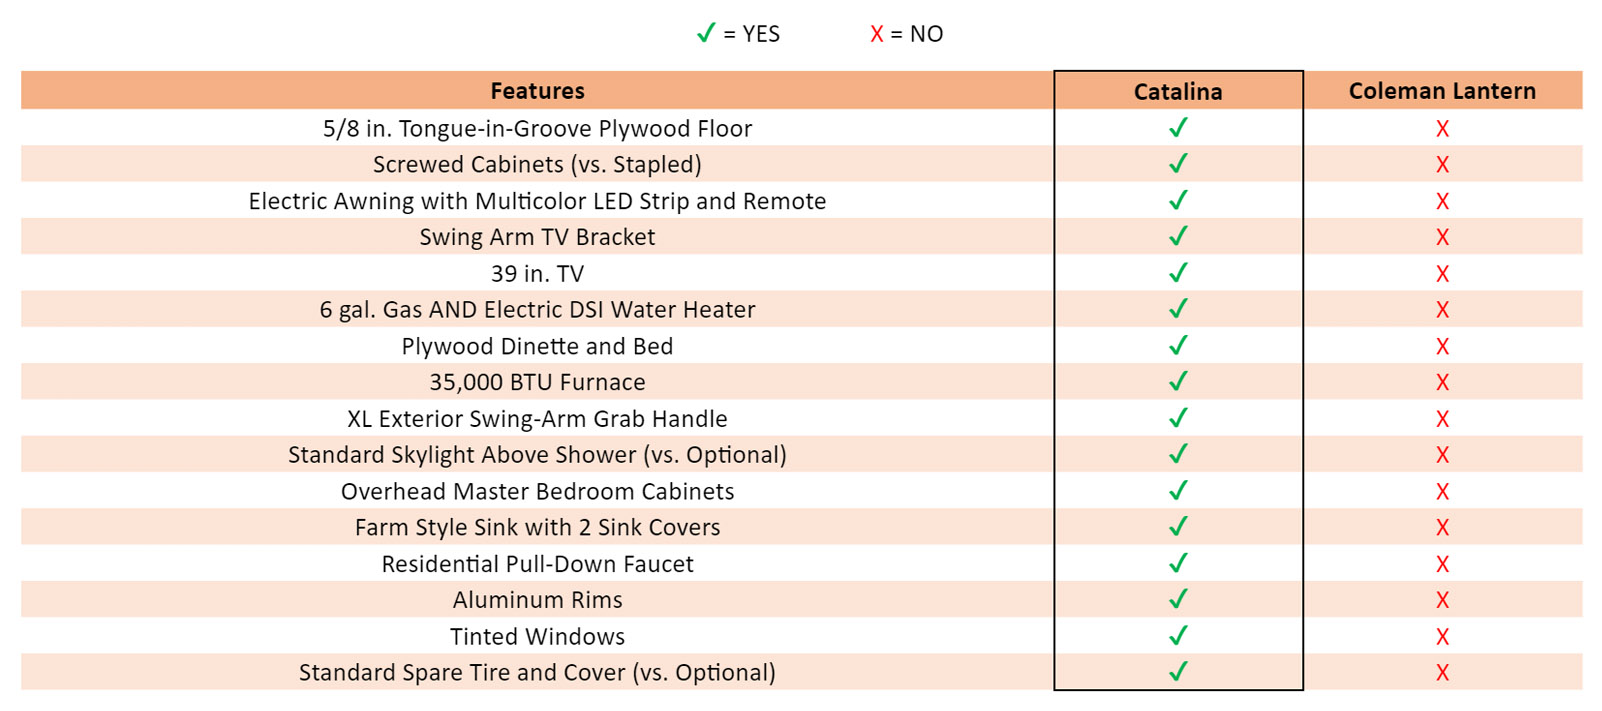 Comparison Table Showing Catalina has better features